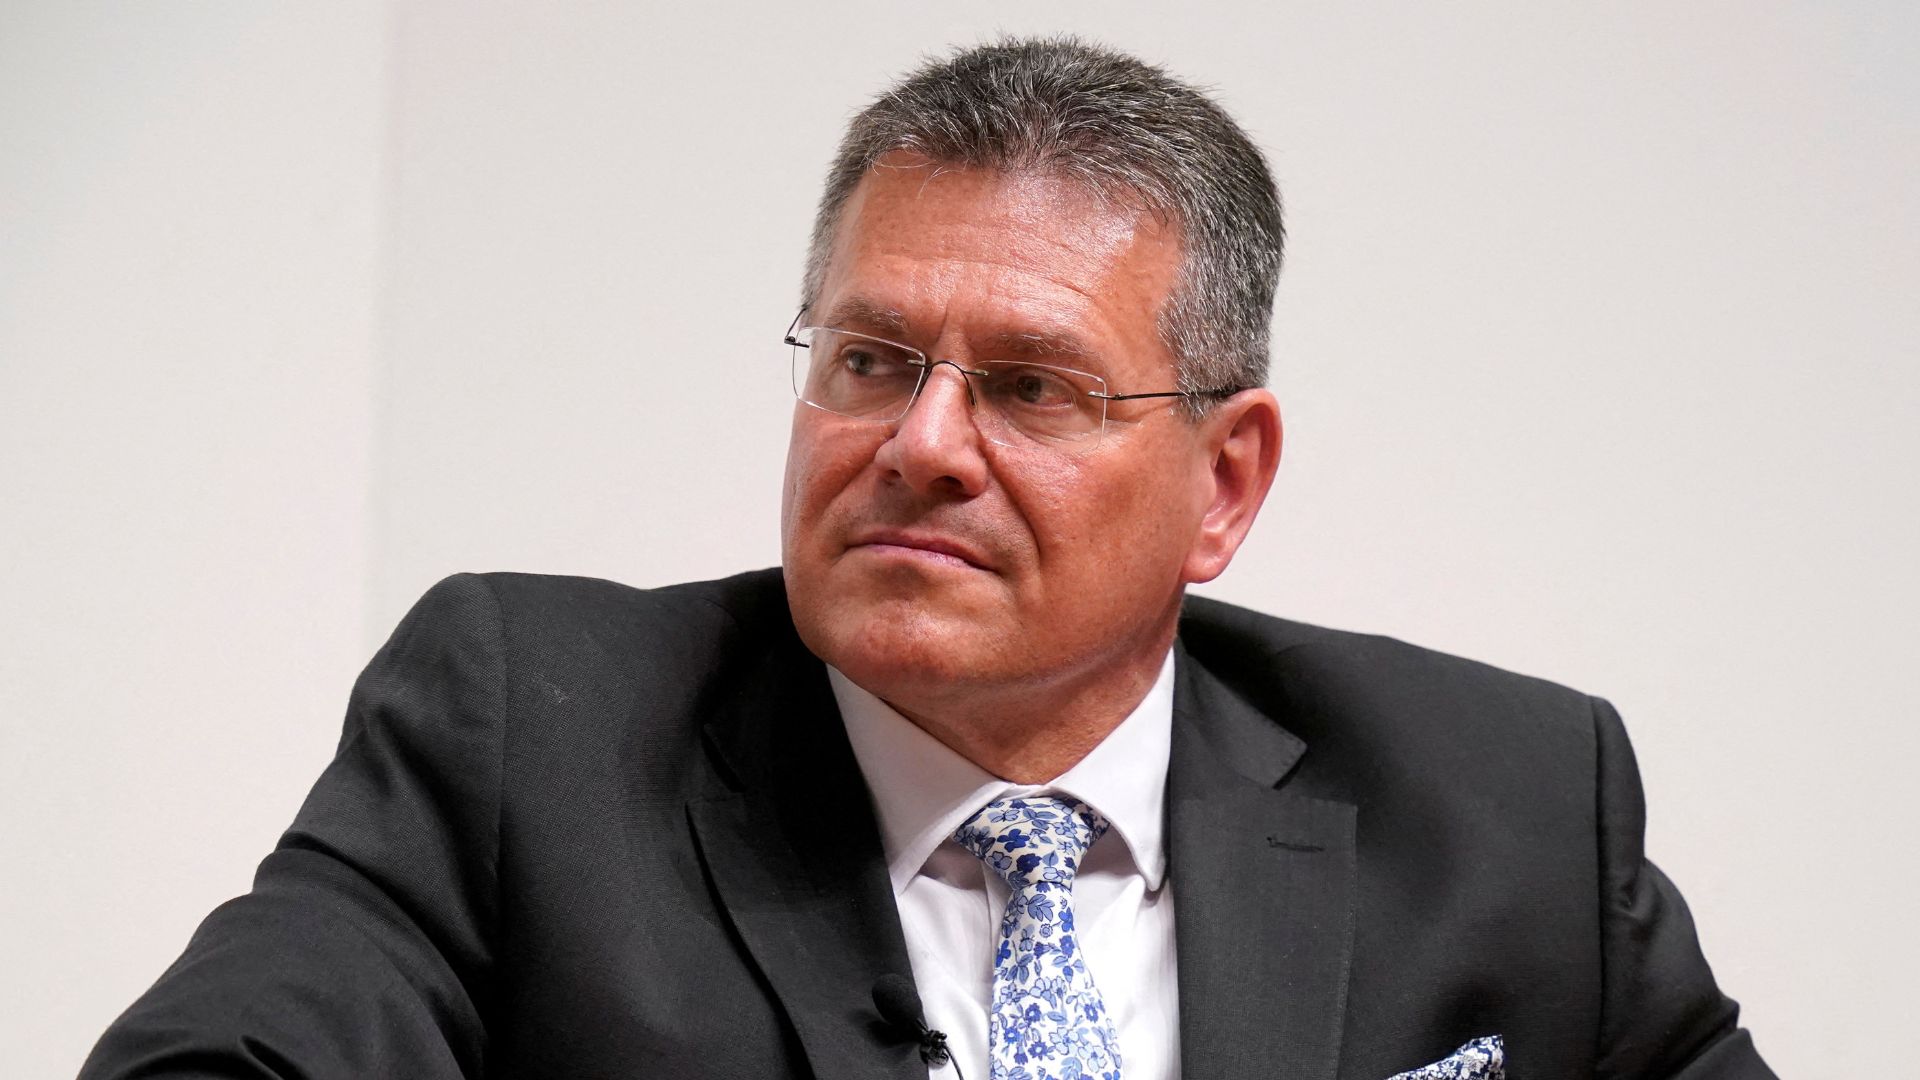  Sefcovic says the EU must improve its communication with industry. /Niall Carson/Pool via Reuters